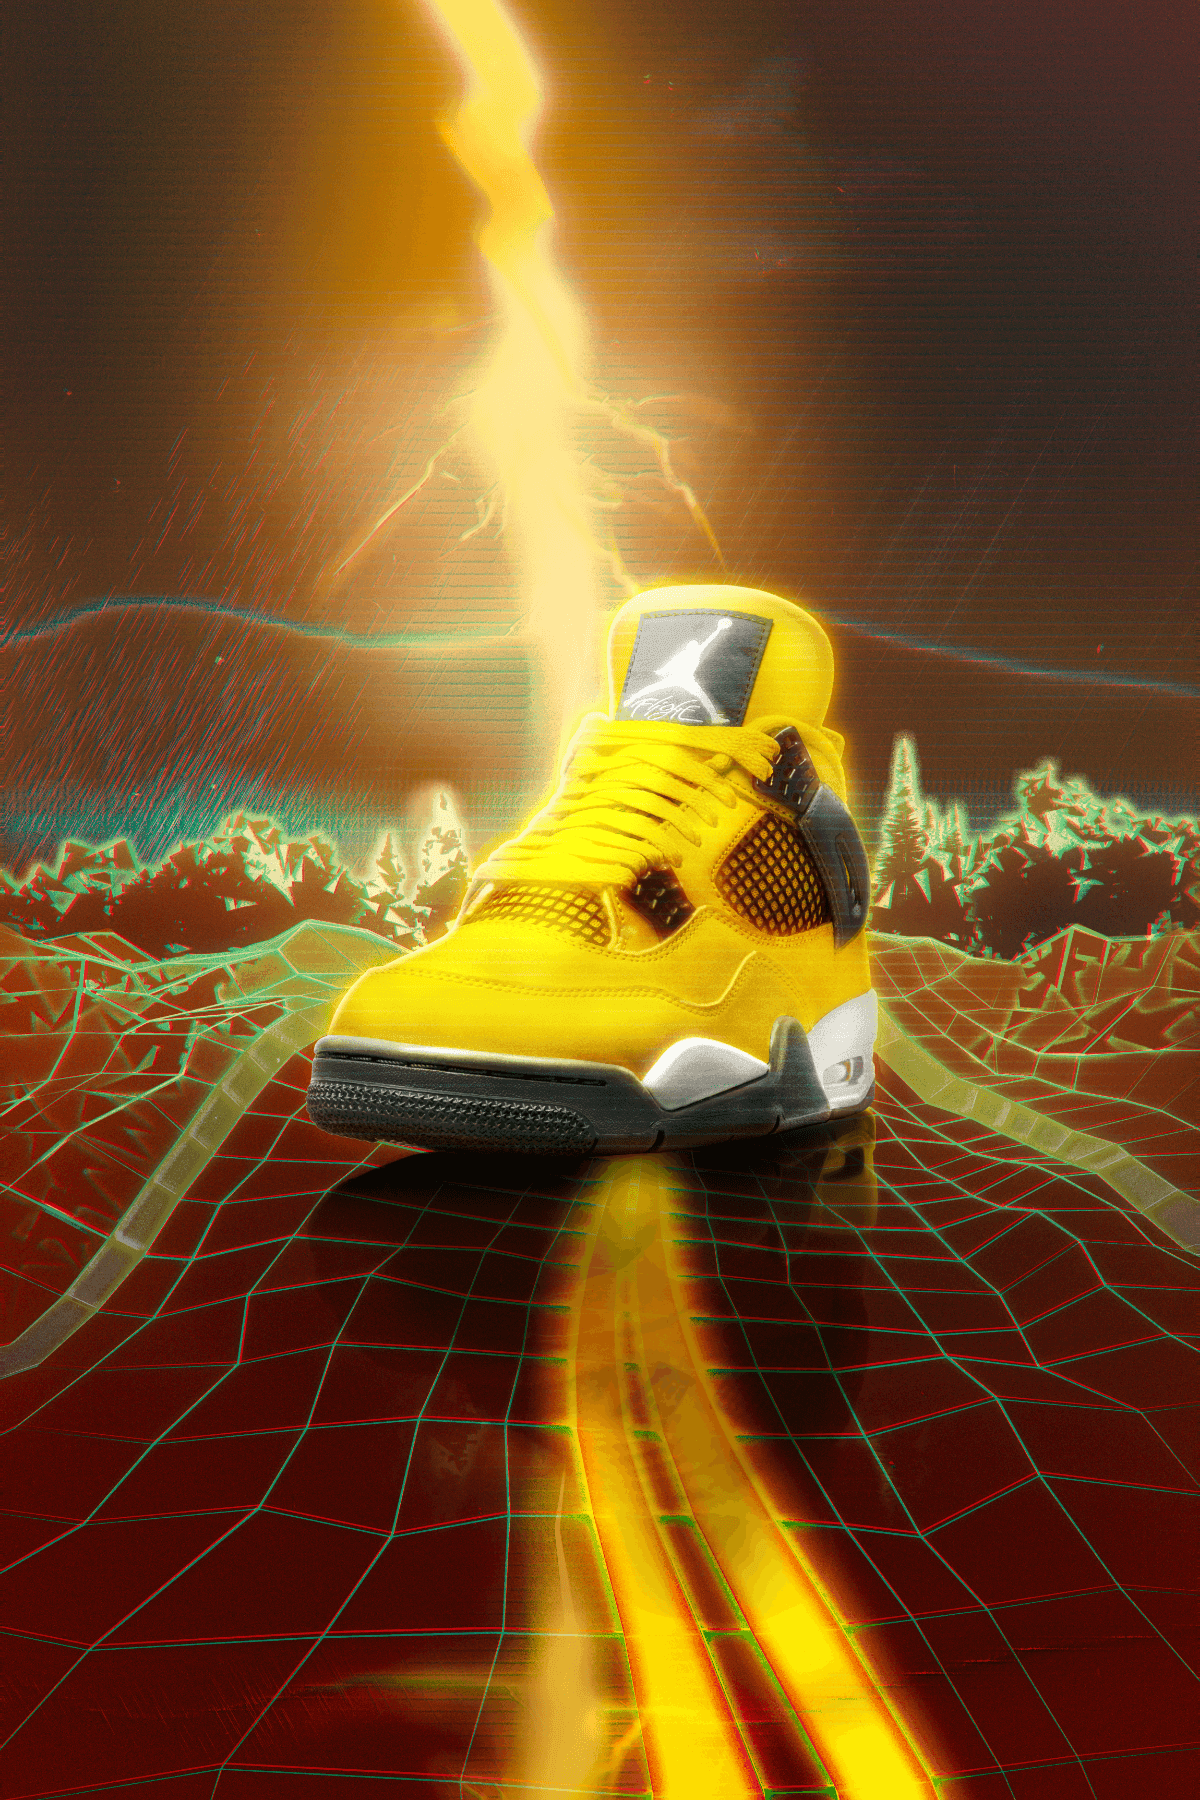 Yellow Jordan 4 rendered on computer graphic road with lightning in background